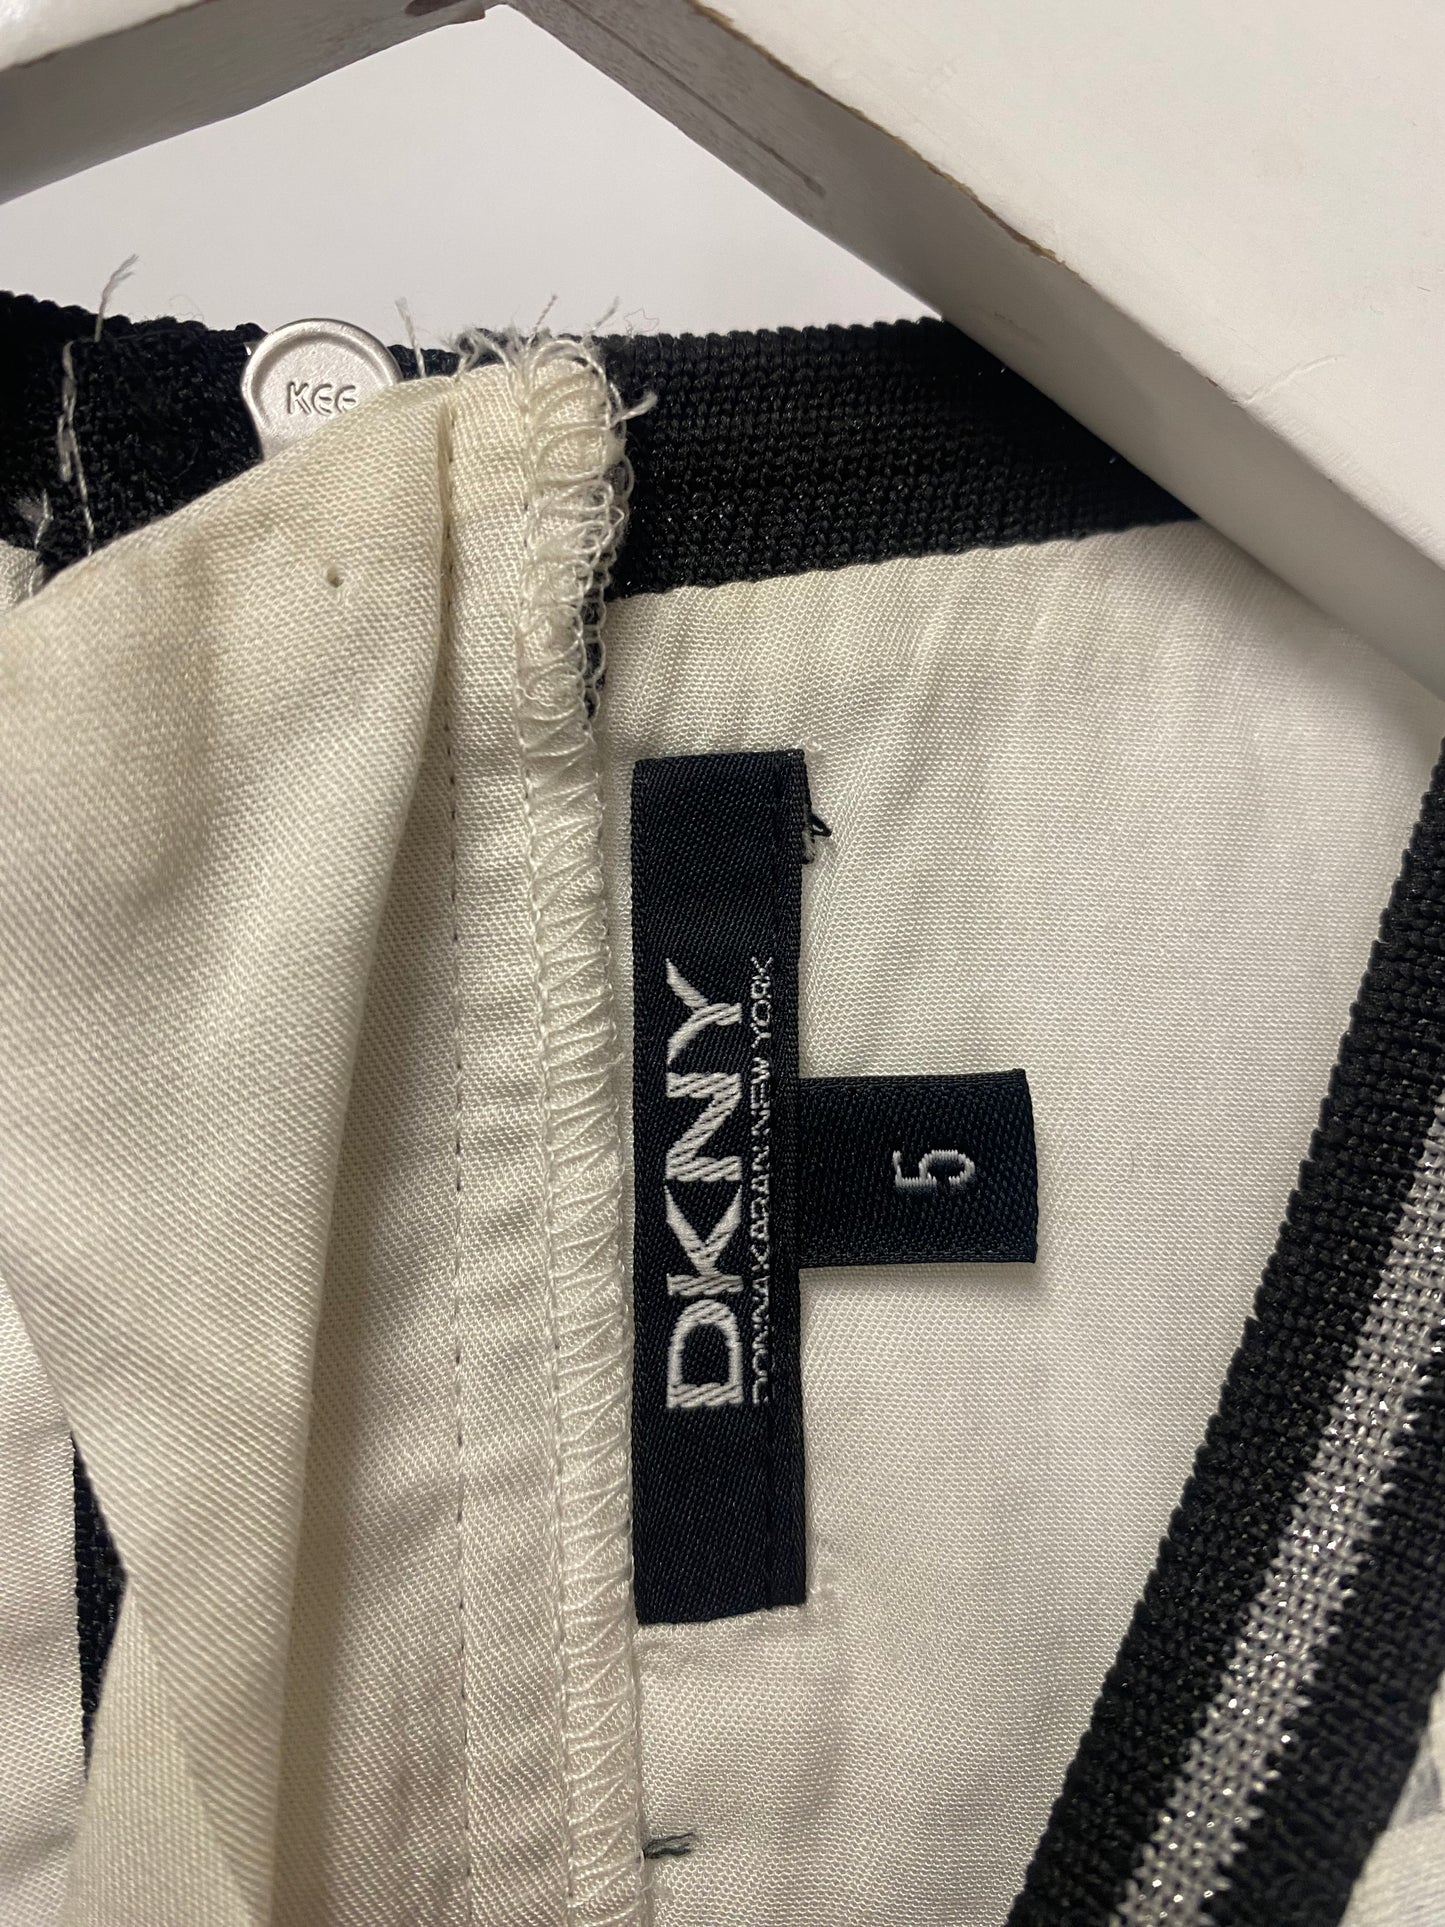 DKNY Kids Black and White Monochrome T-shirt Style Dress 5 years